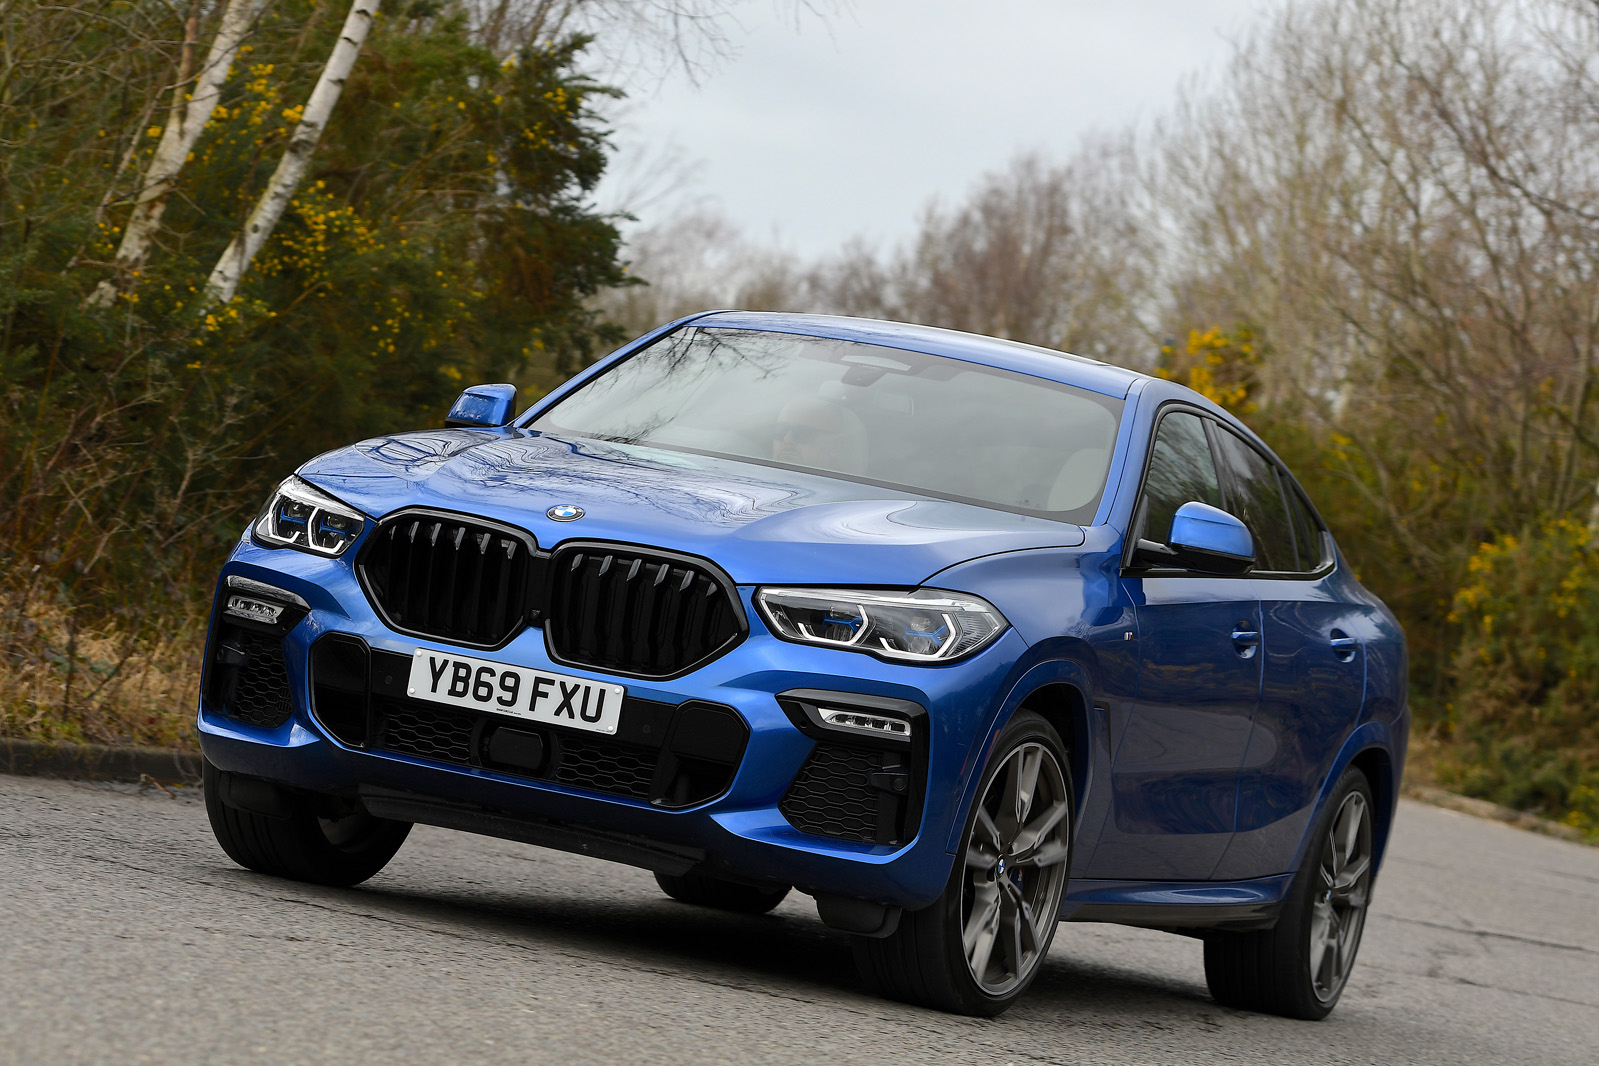 Nearly new buying guide: BMW X6